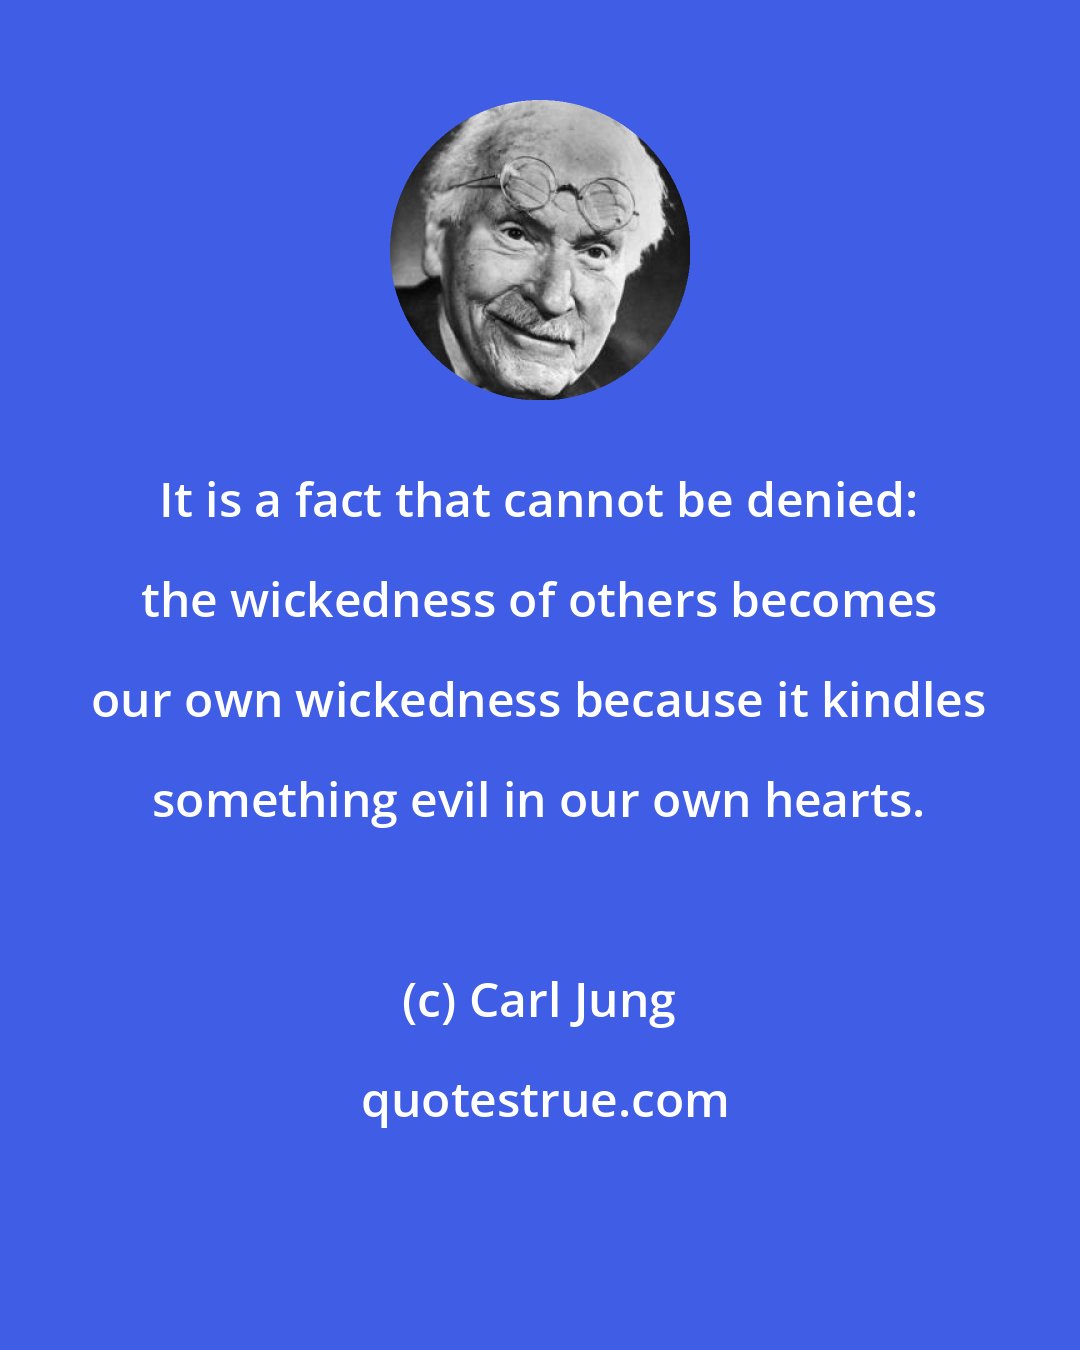 Carl Jung: It is a fact that cannot be denied: the wickedness of others becomes our own wickedness because it kindles something evil in our own hearts.